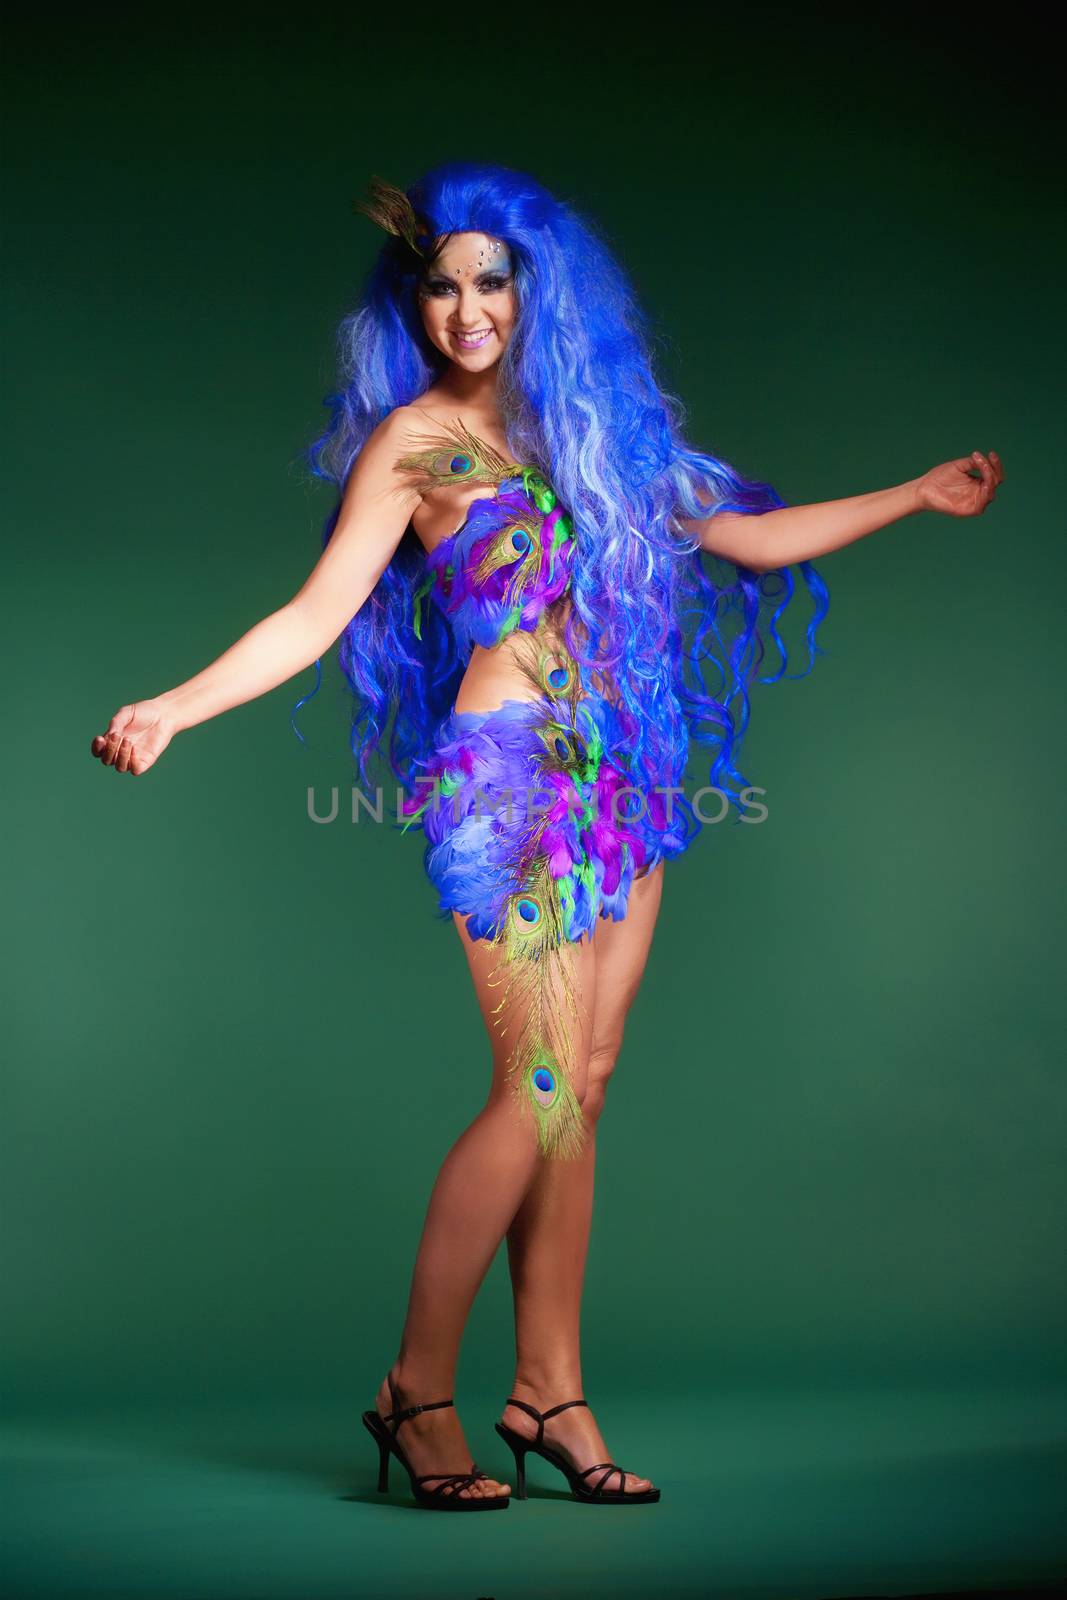 Young Woman in Blue Wig and Dress of Feathers